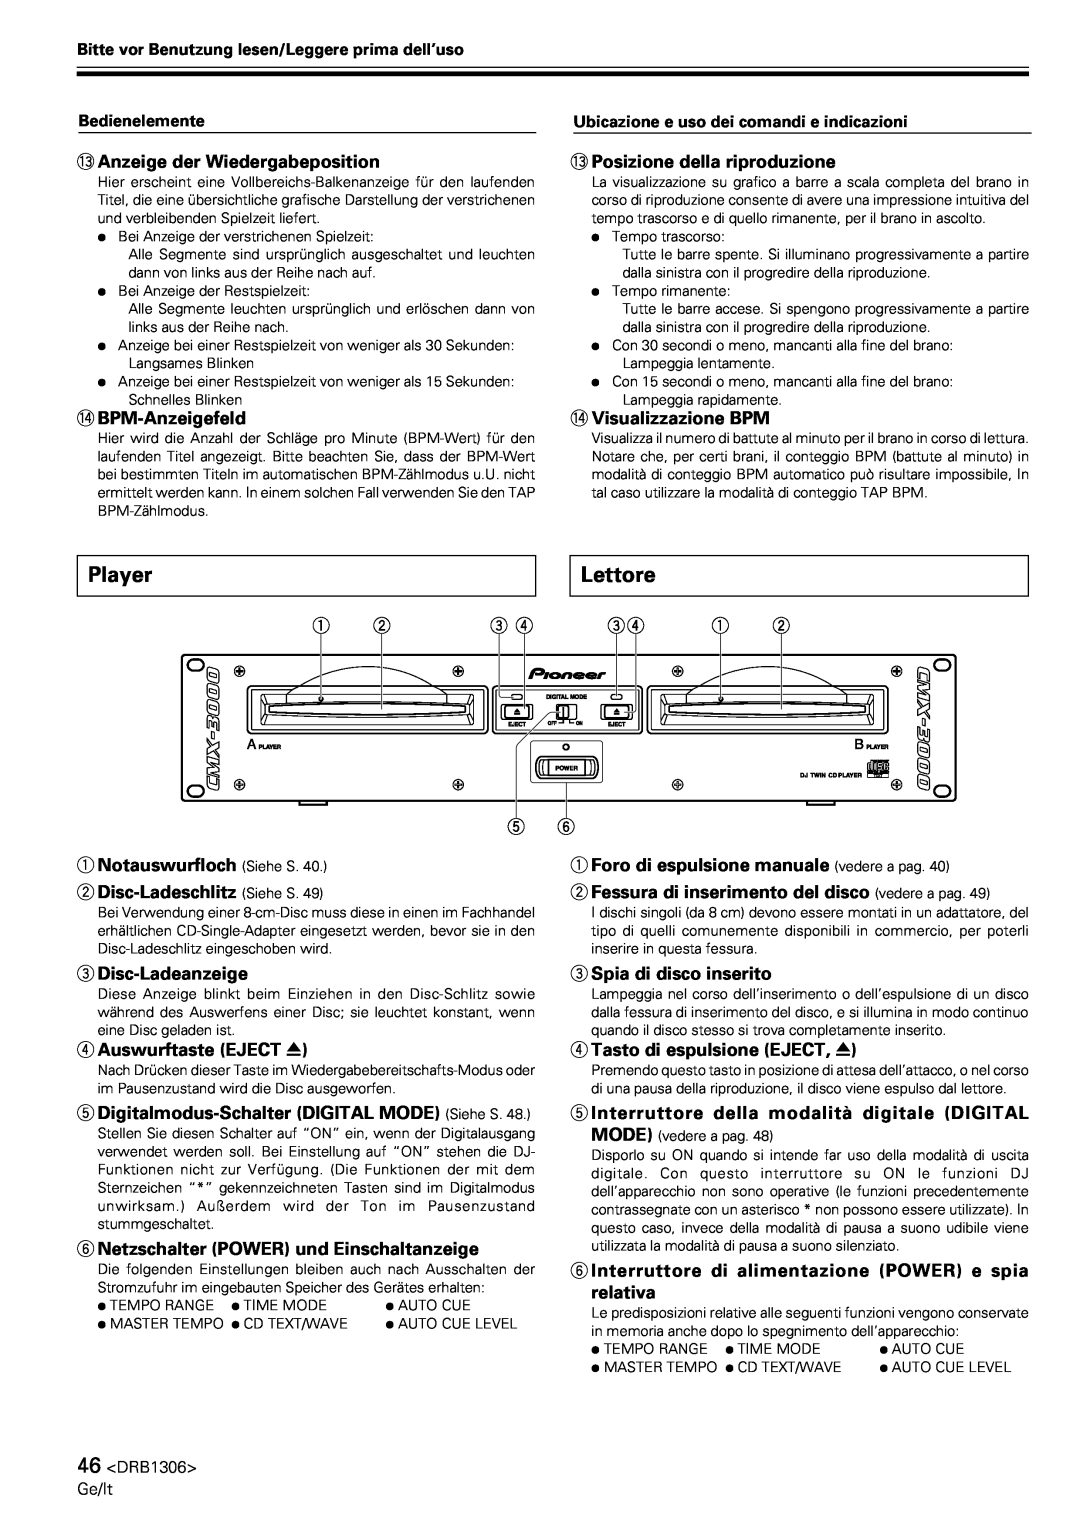 Pioneer CMX-3000 operating instructions Lettore, Player 